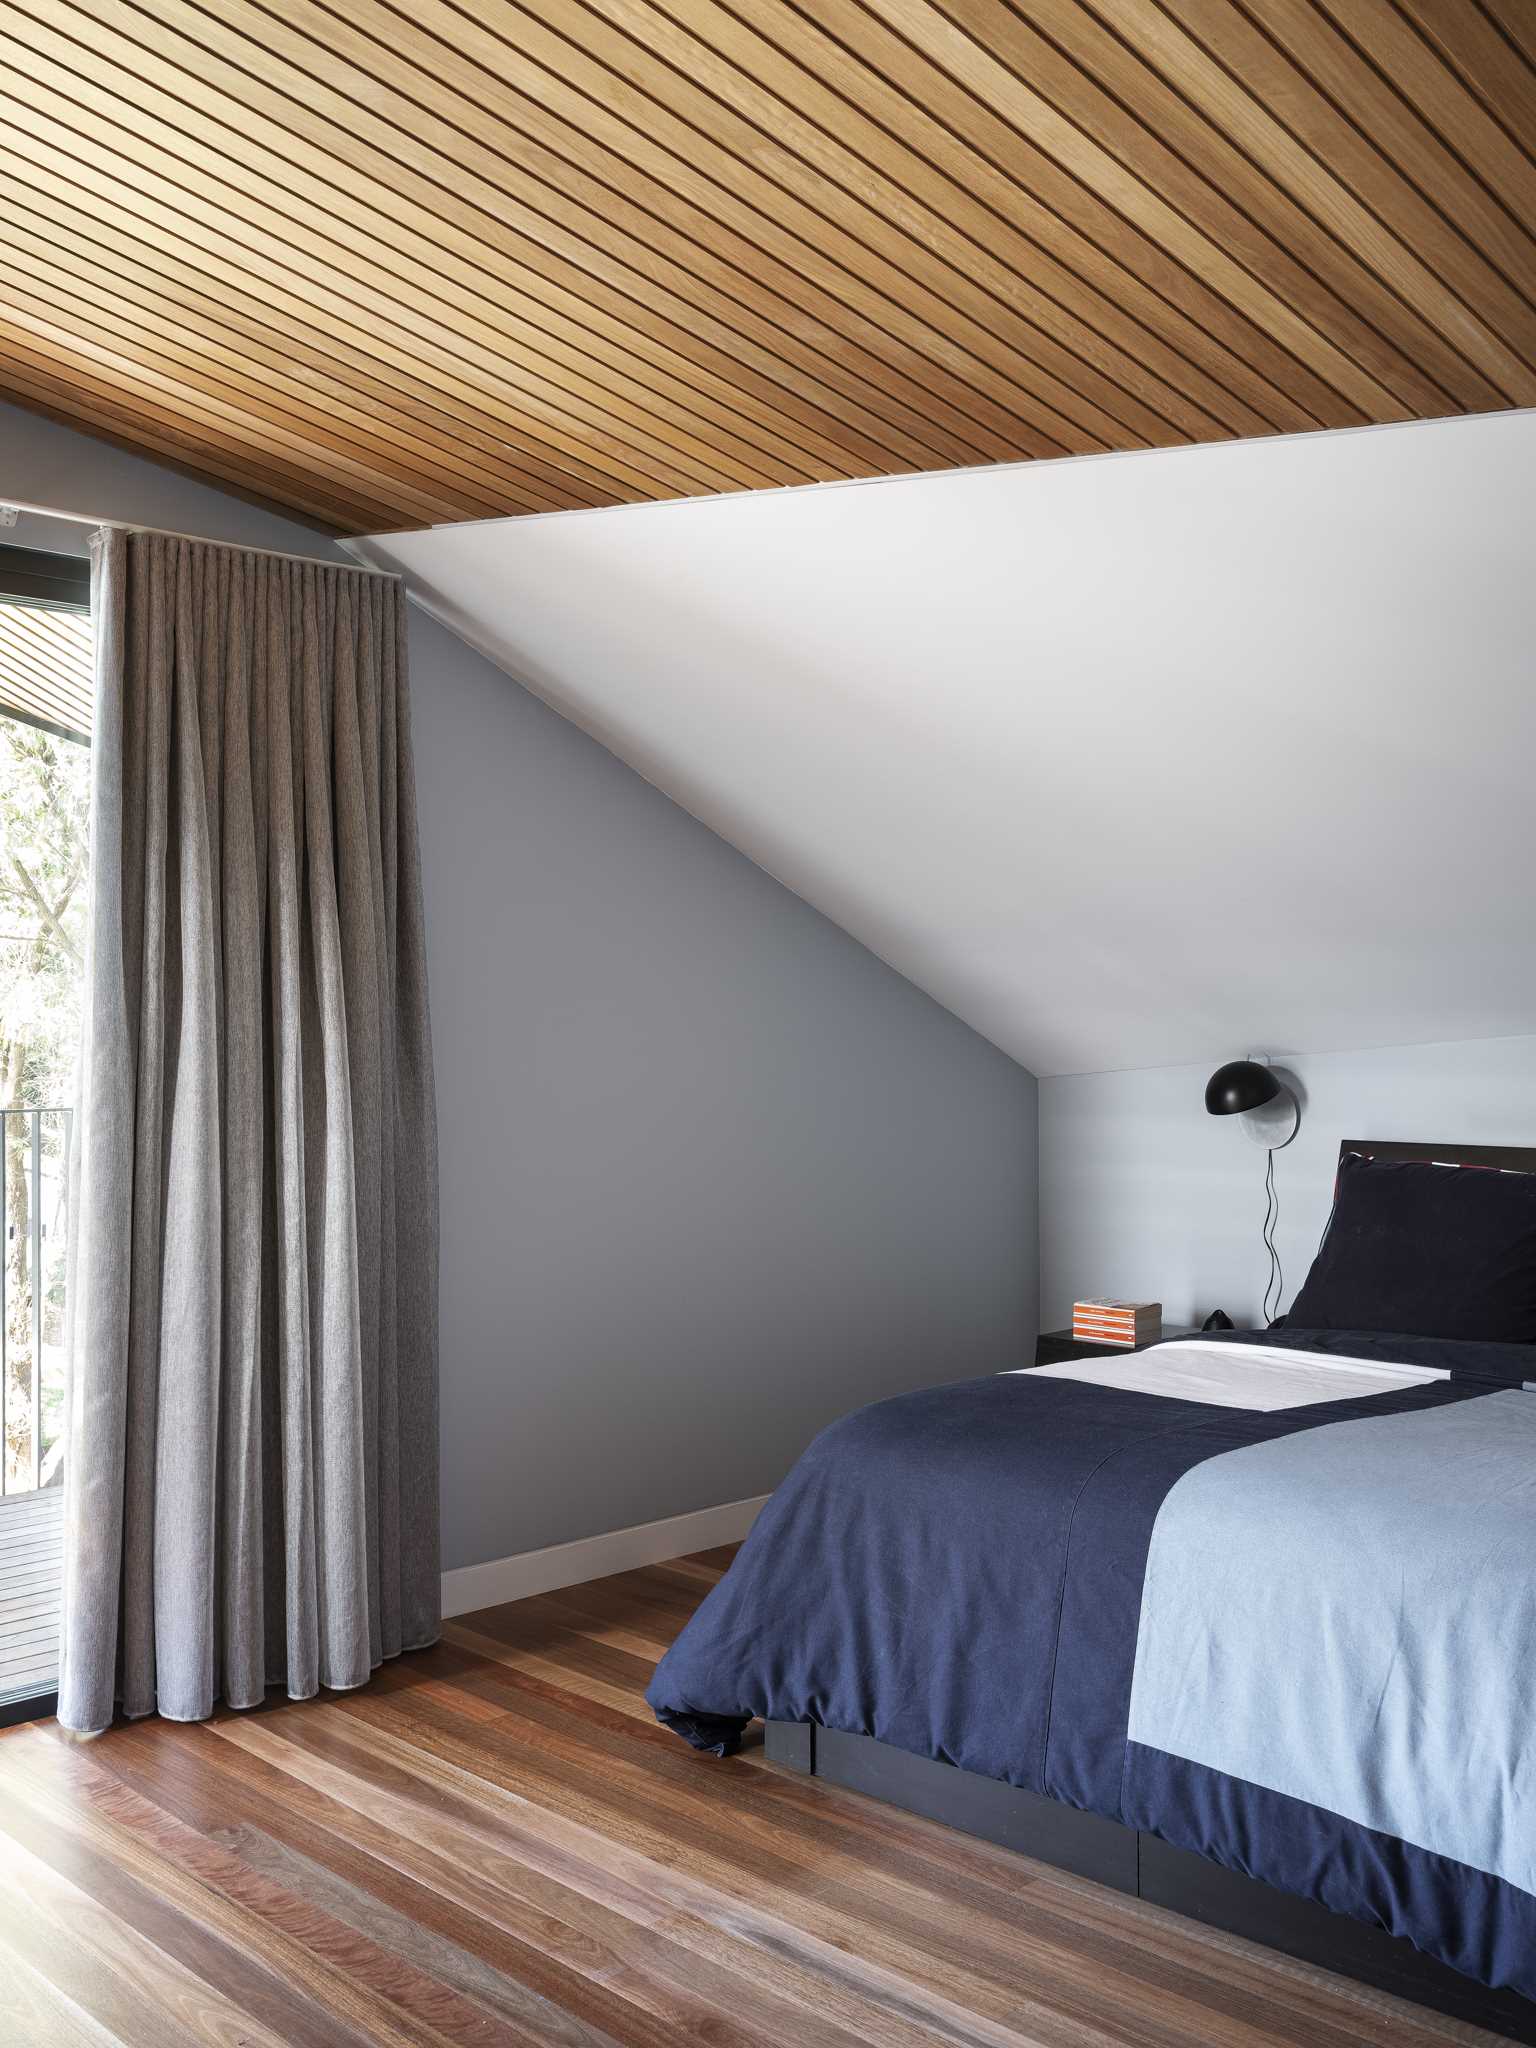 In this modern bedroom, there's a wood ceiling and a wood floor, while a grey accent wall surrounds a sliding glass door that opens to a balcony.